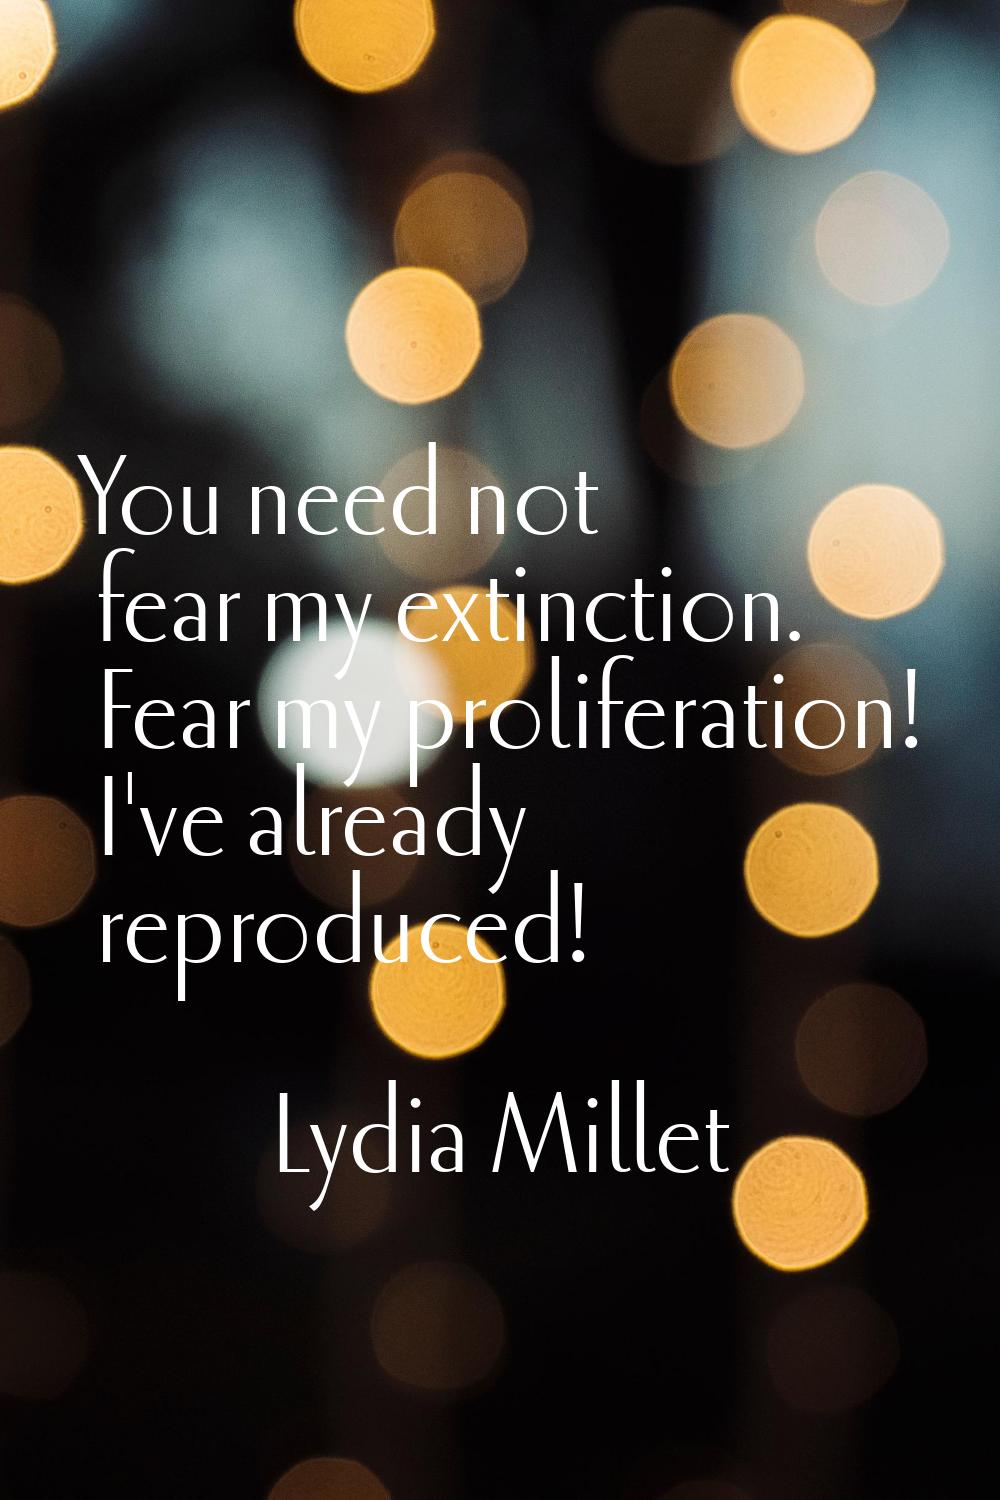 You need not fear my extinction. Fear my proliferation! I've already reproduced!